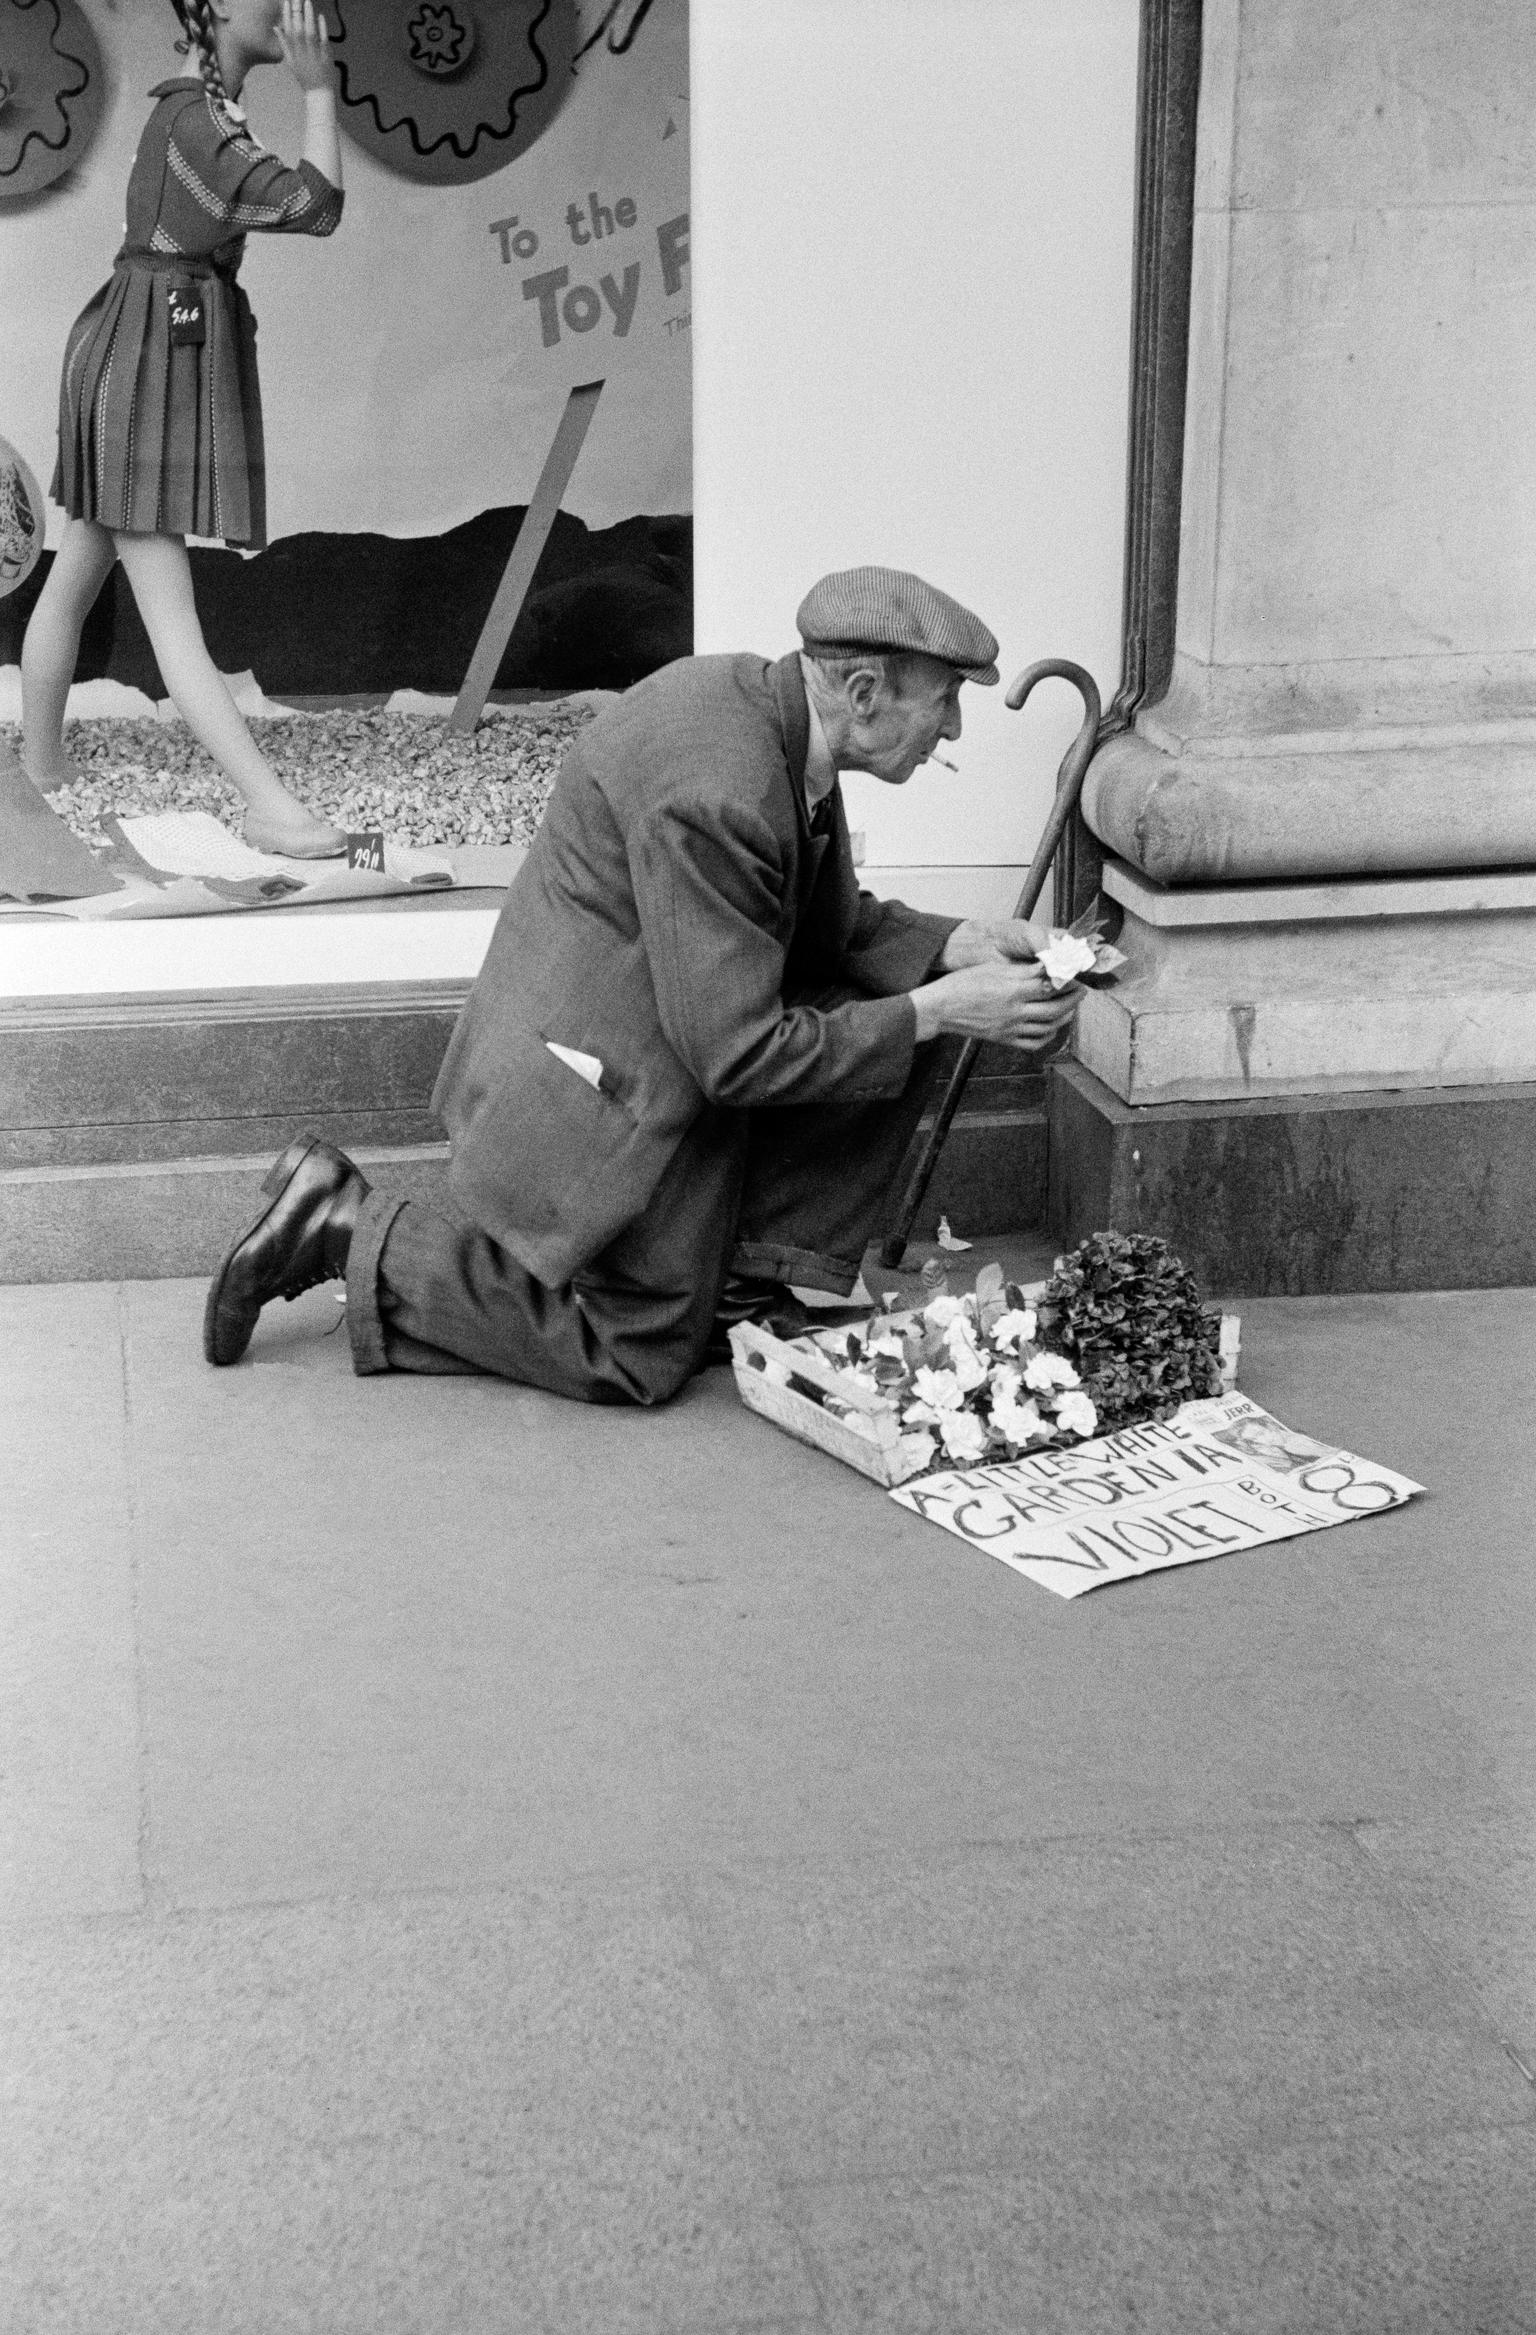 Street trader in Oxford Street. One of the first pictures ever taken by David Hurn, shot on a a Kodak folding Retina camera (first camera). London